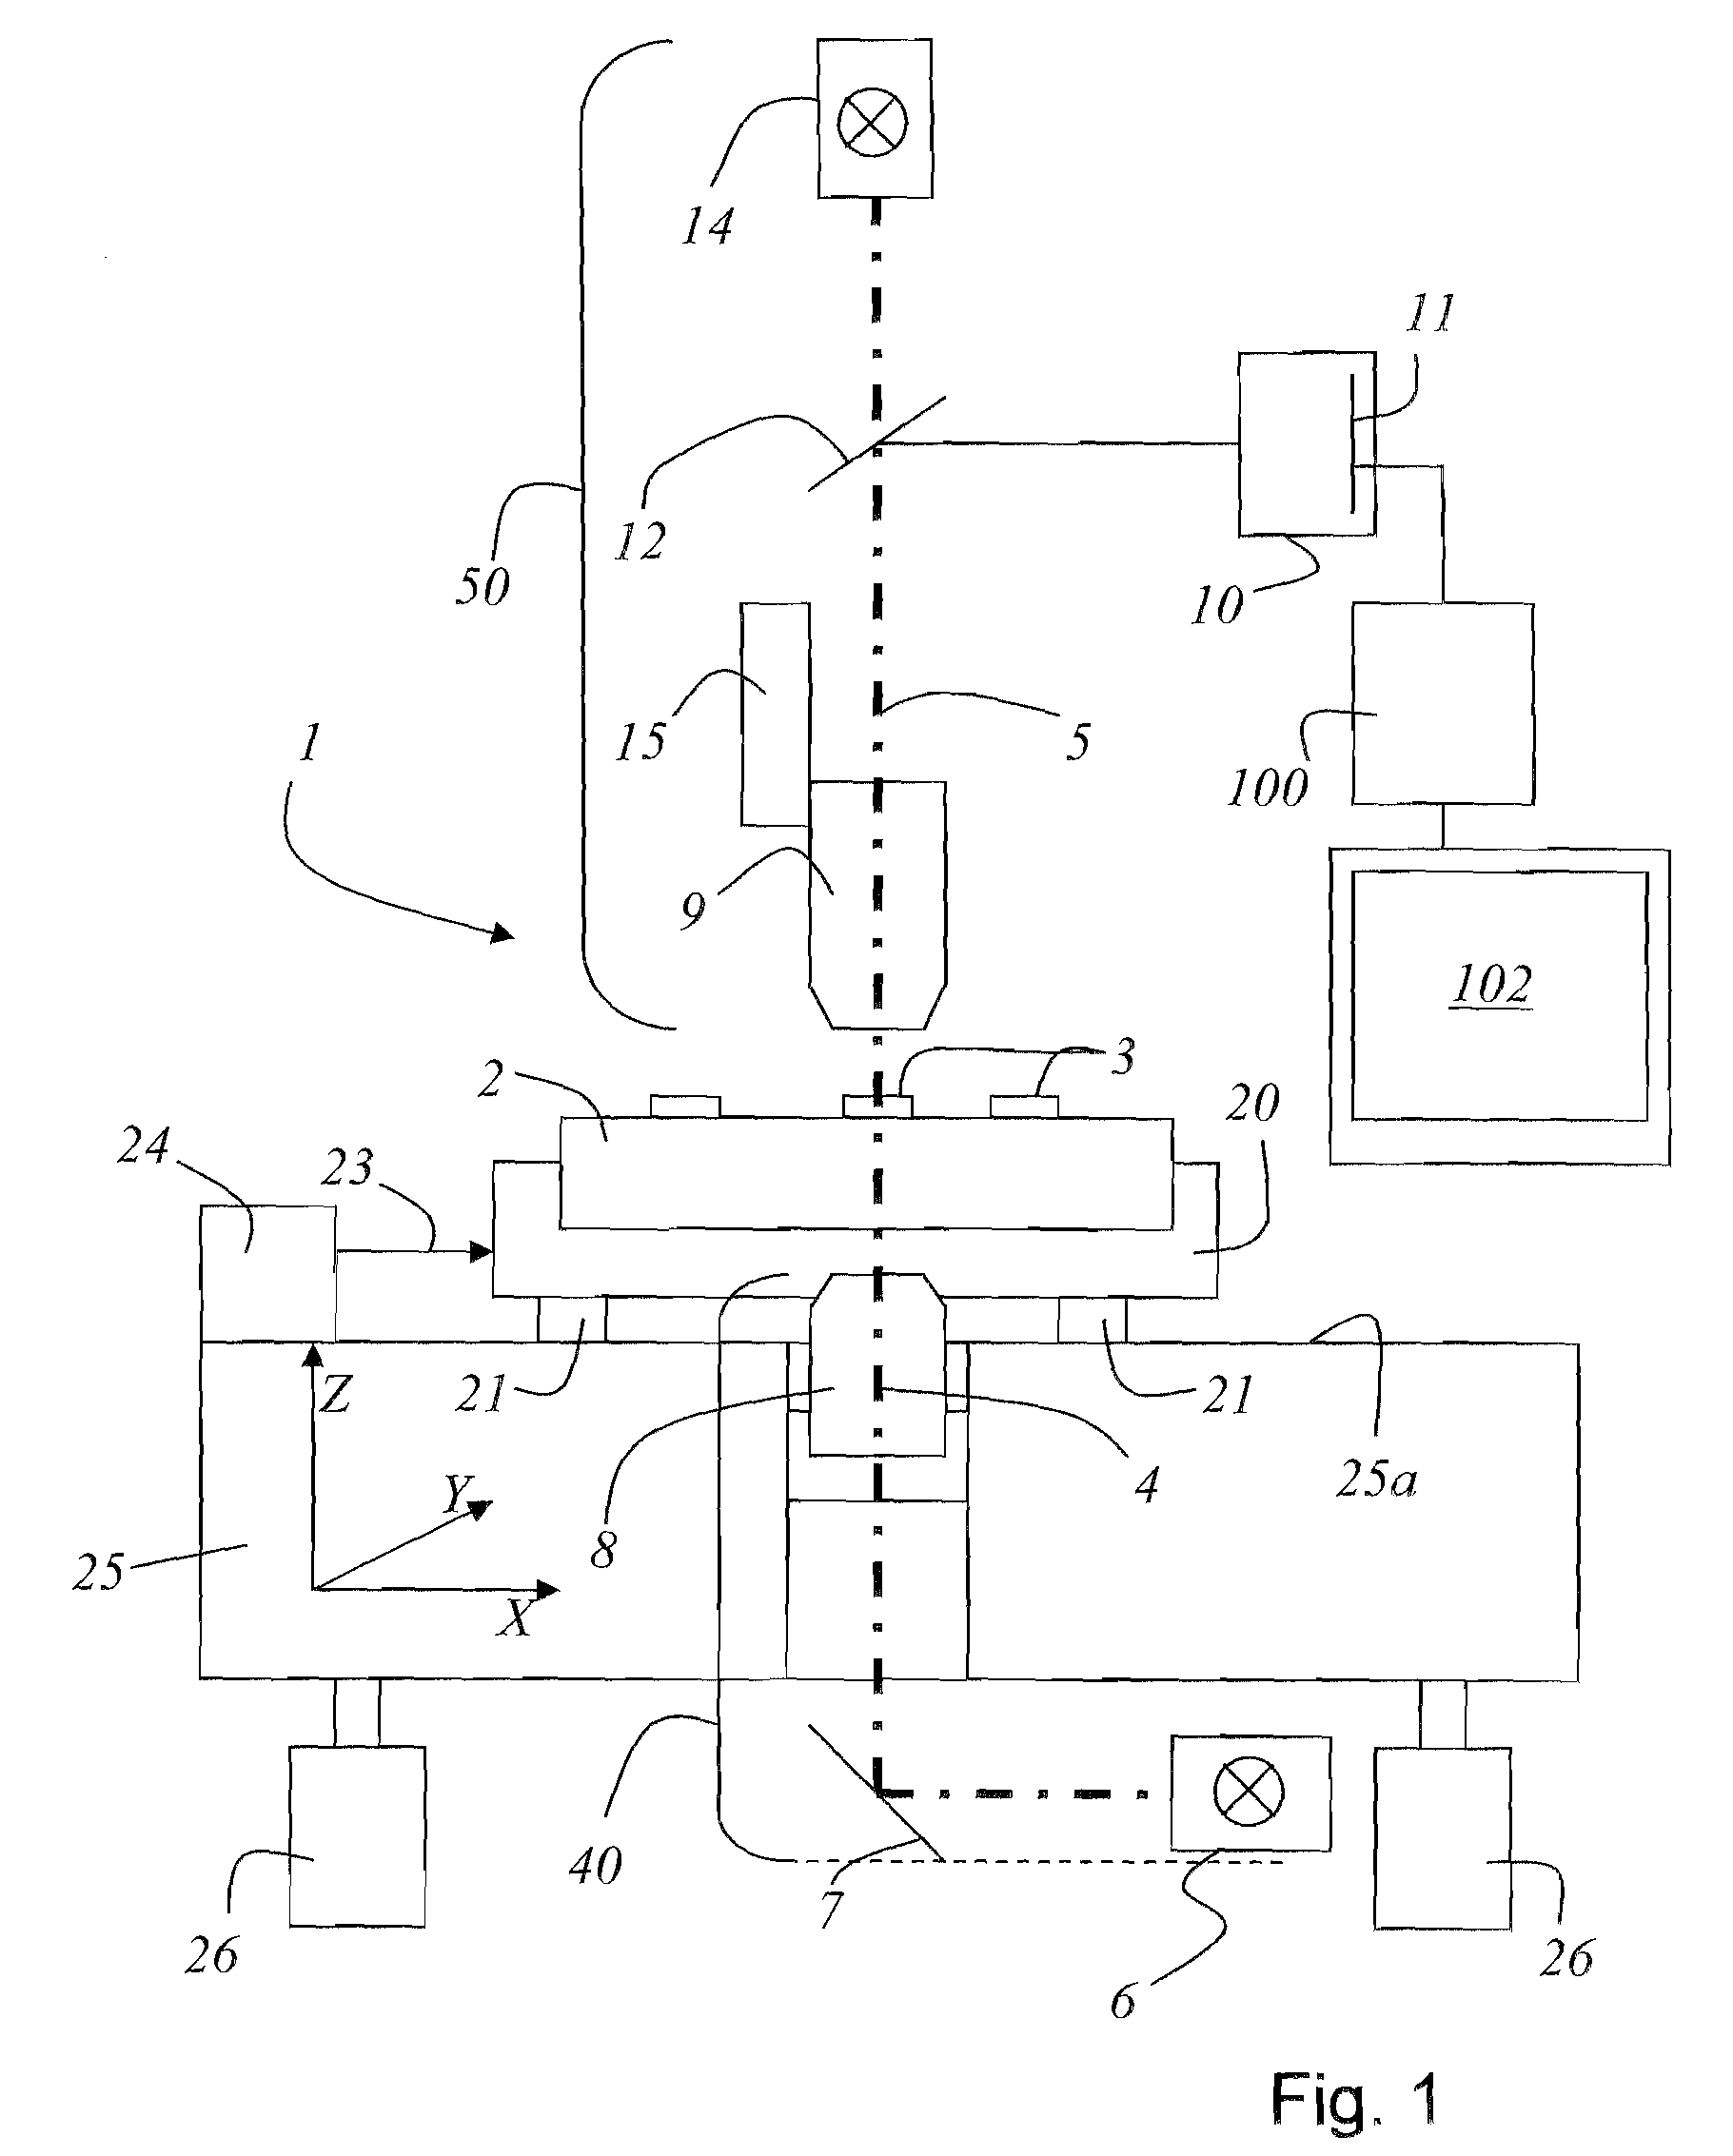 Method for eliminating sources of error in the system correction of a coordinate measuring machine